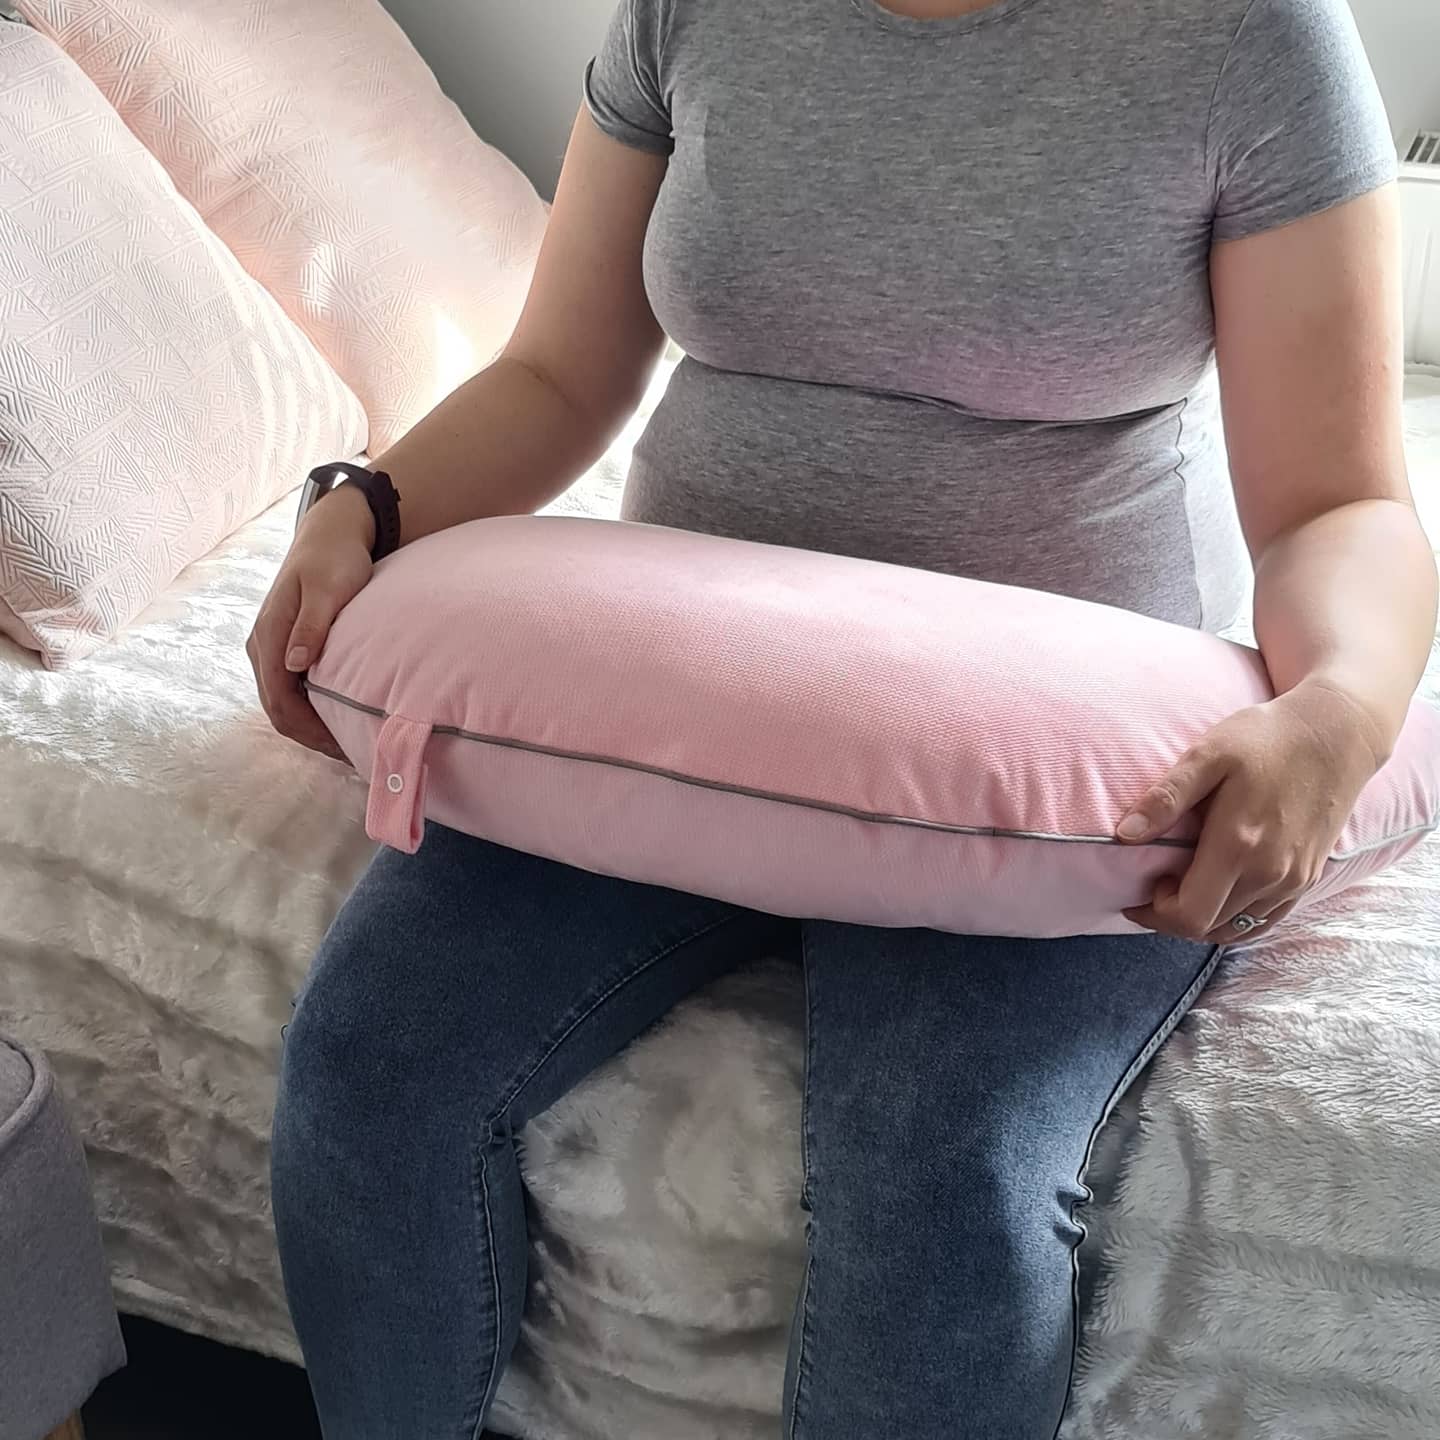 evcushy pregnancy support pillow nursing pillow feeding cushion with cover